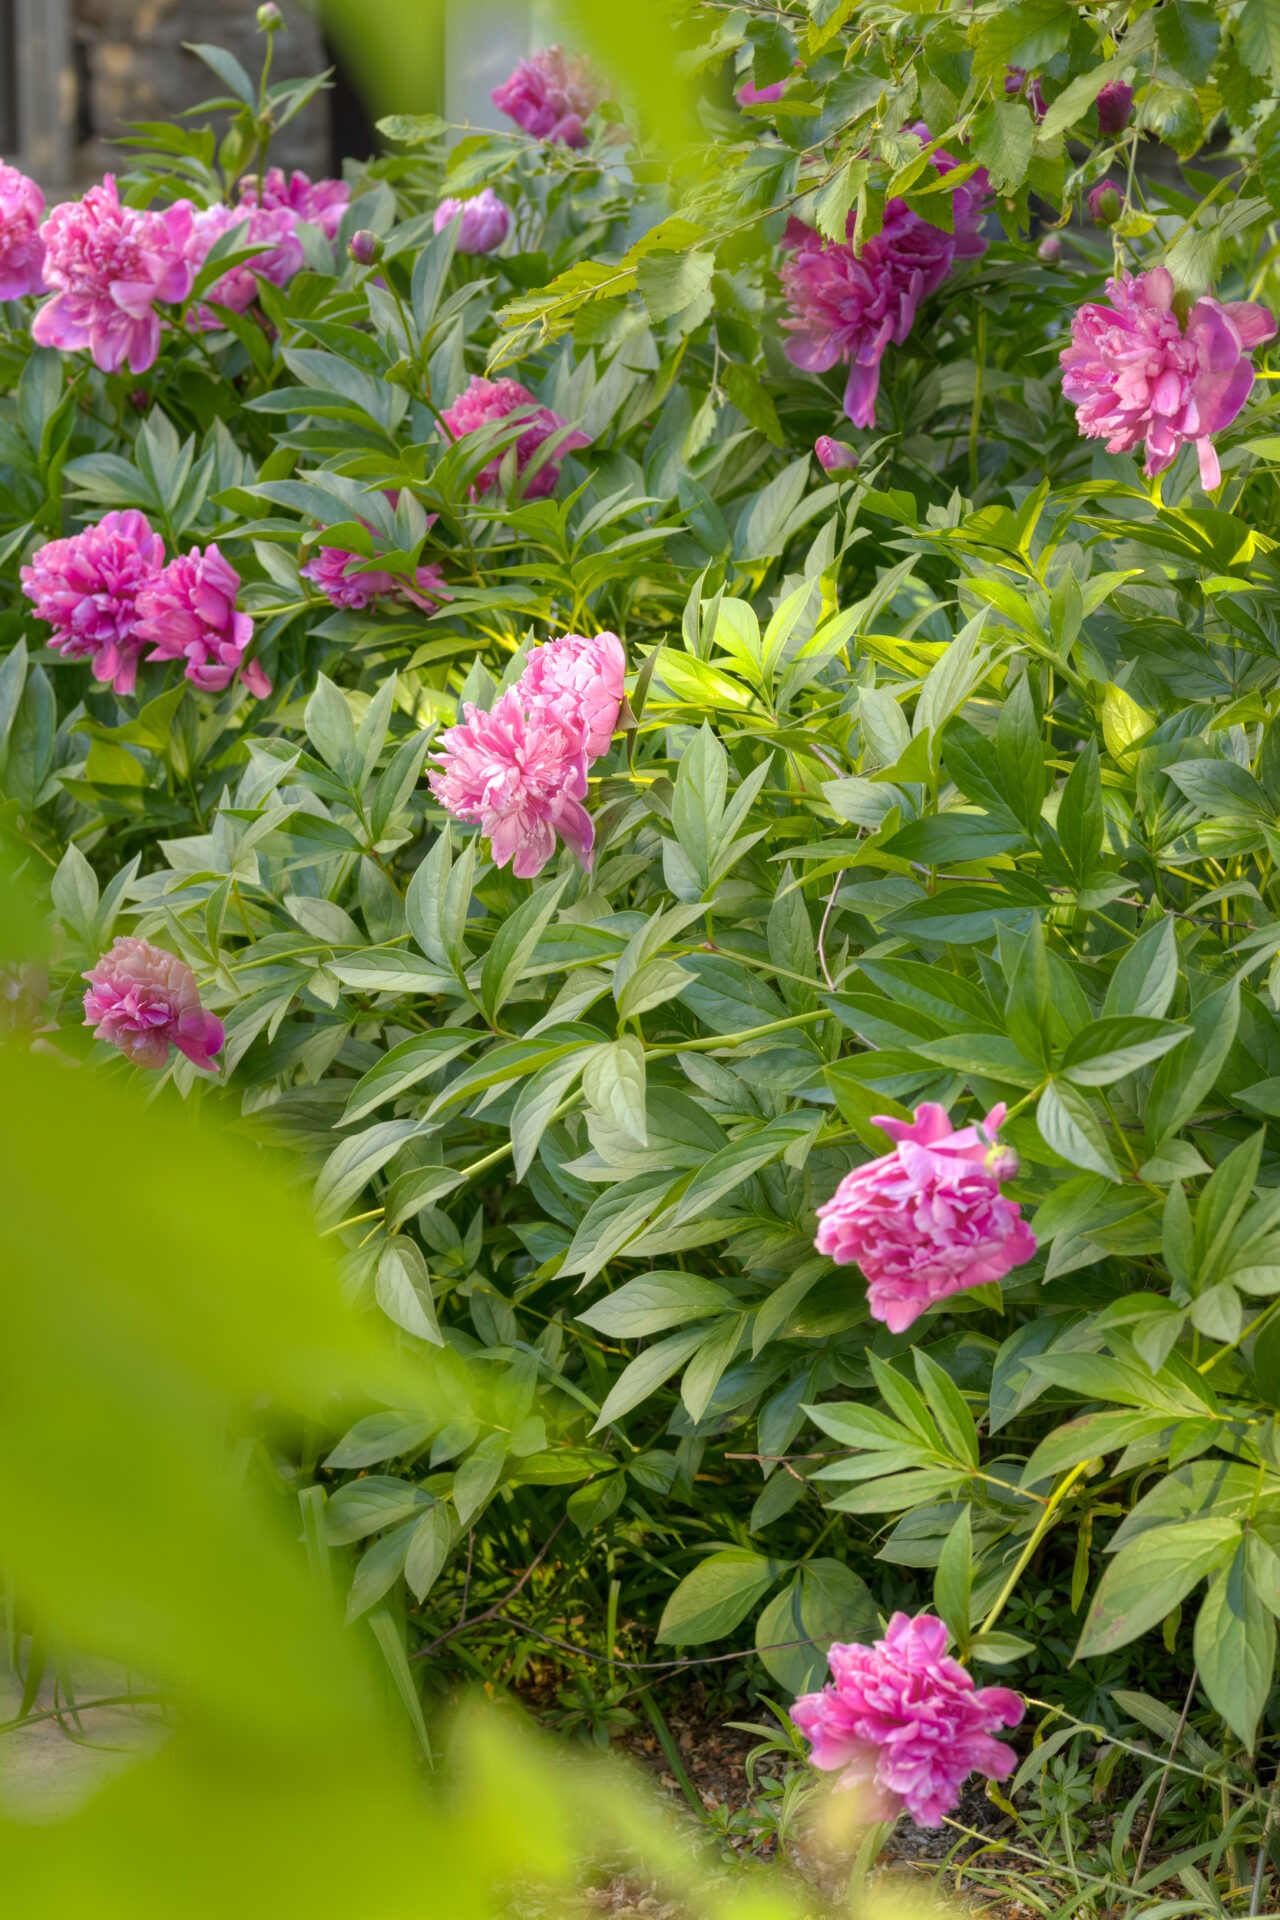 Lush green foliage with vibrant pink peonies in bloom. A blurred foreground suggests a hidden garden aesthetic, evoking a sense of tranquility and natural beauty.